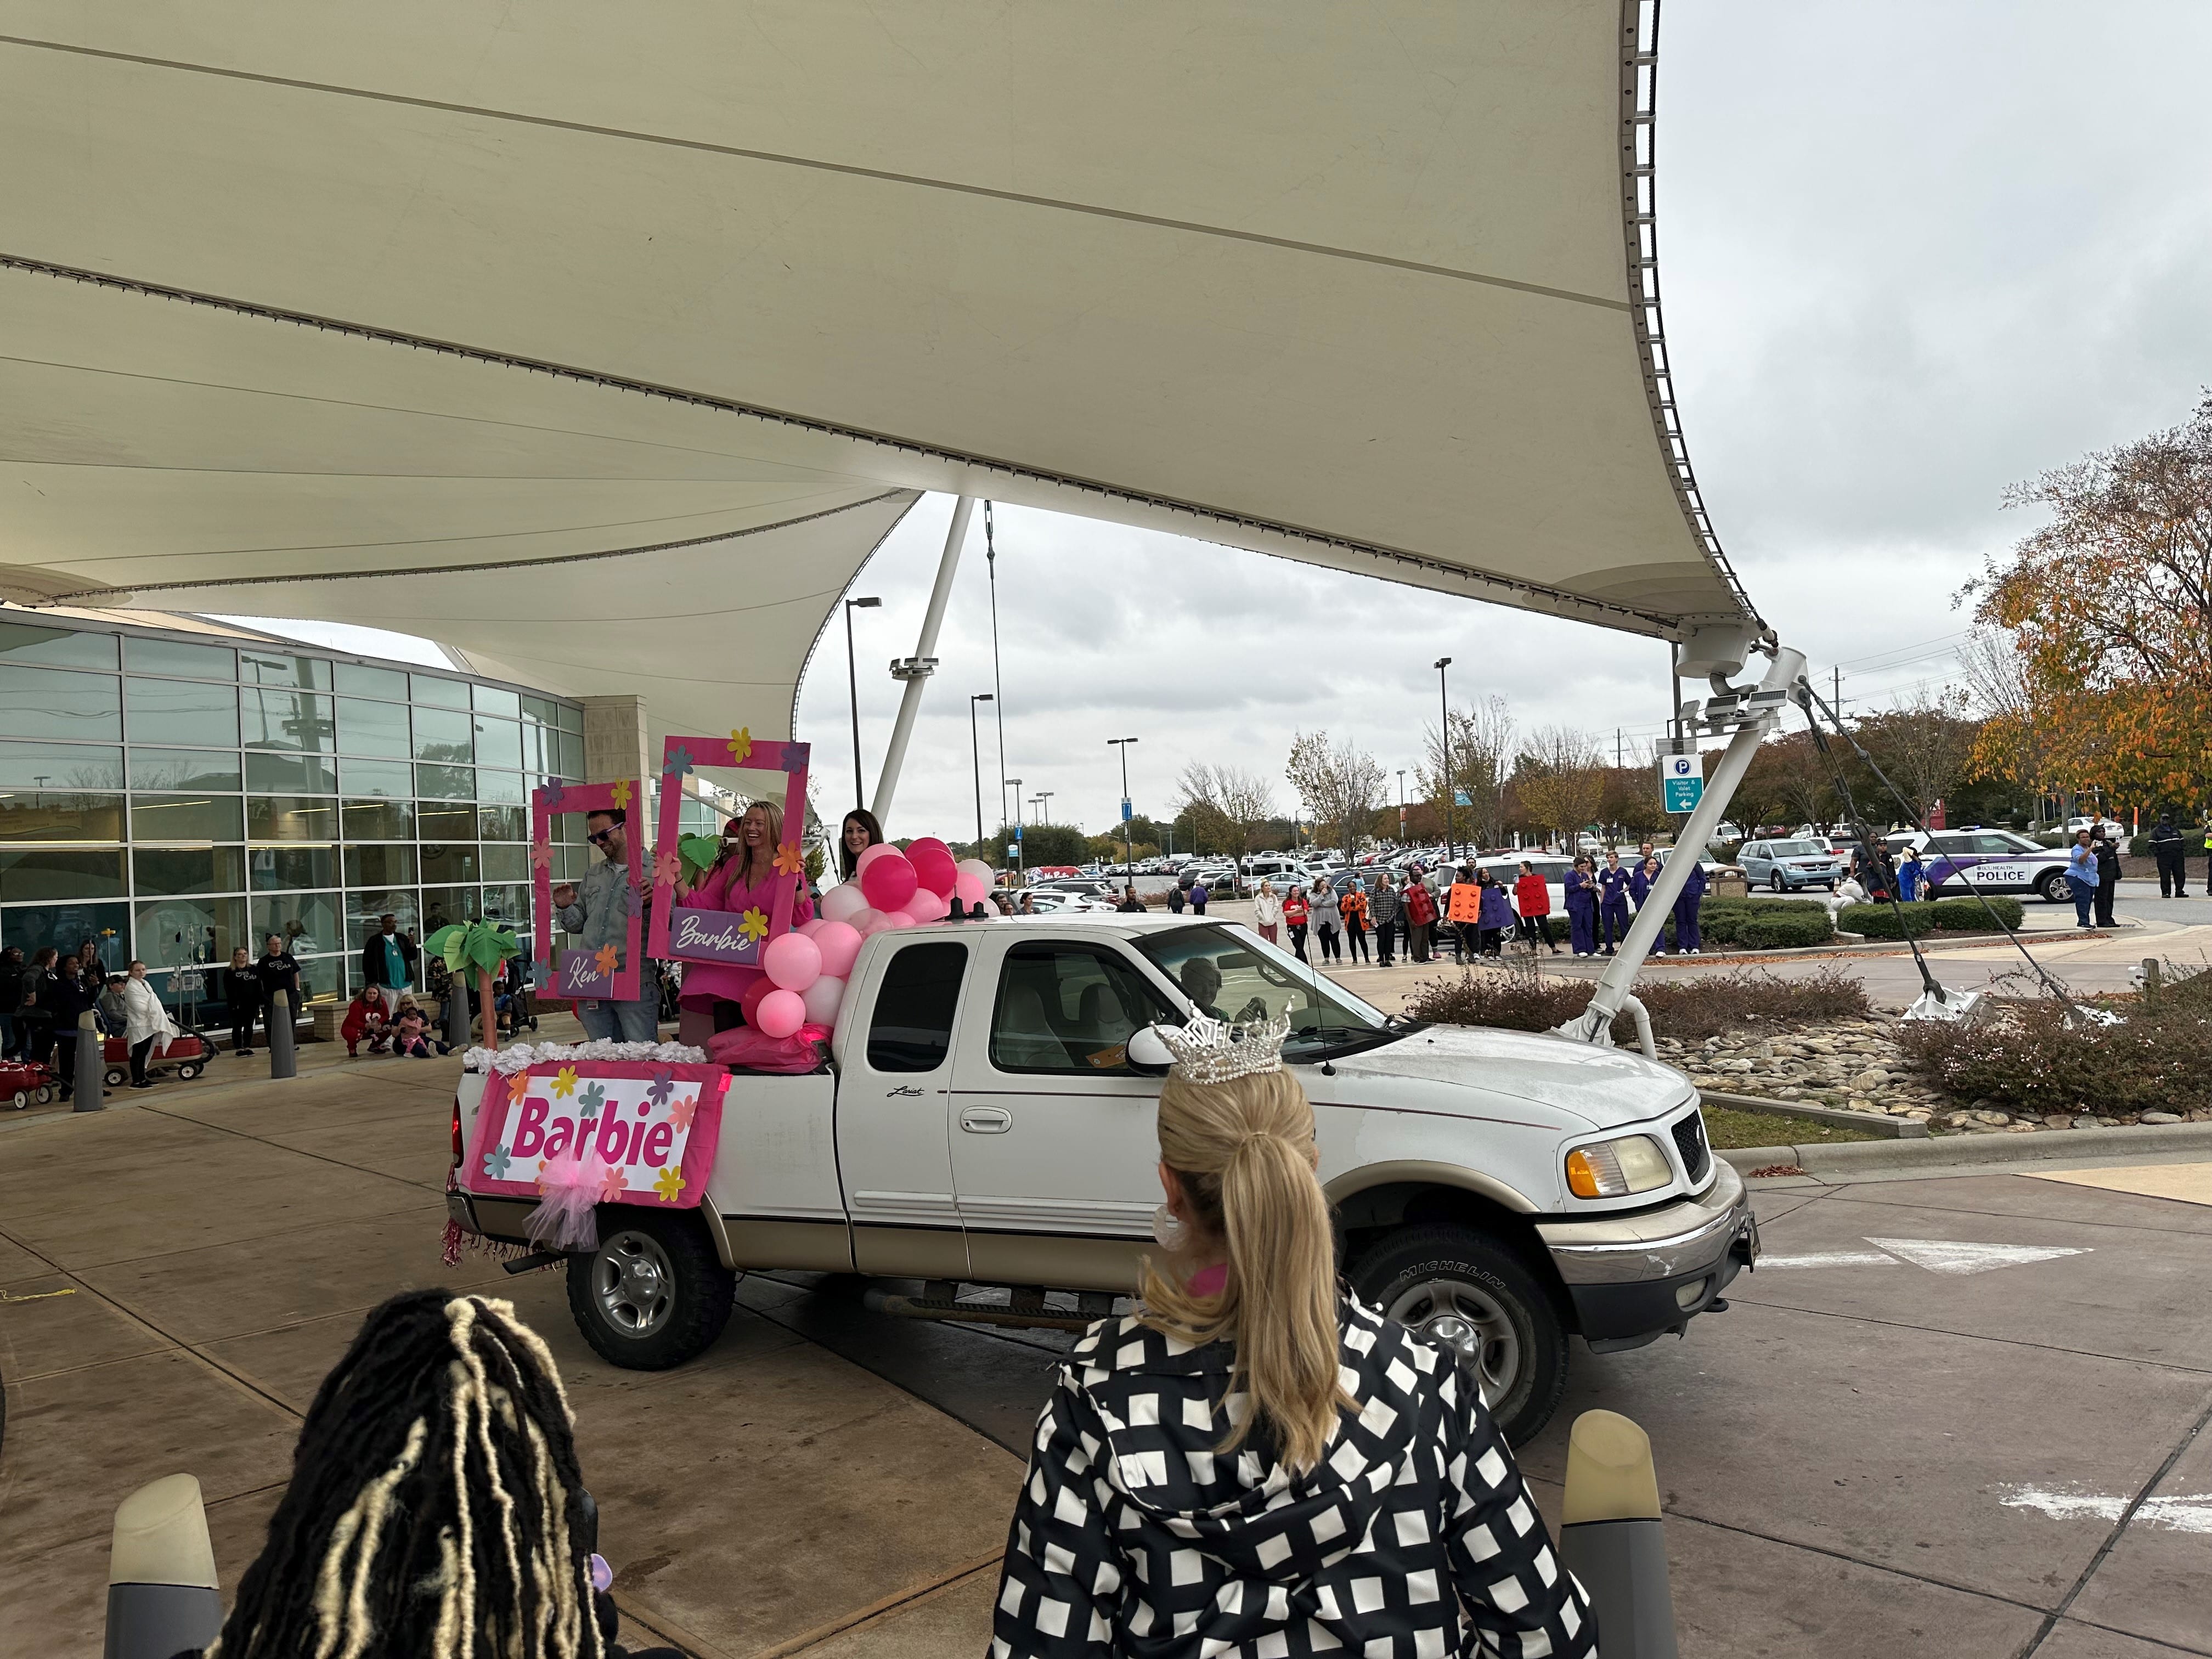 Excited ECU Health team members, dressed as Barbie and Ken, wave to Children's Hospital Halloween parade attendees from the back of a pickup truck, decked out in pink Barbie flare.